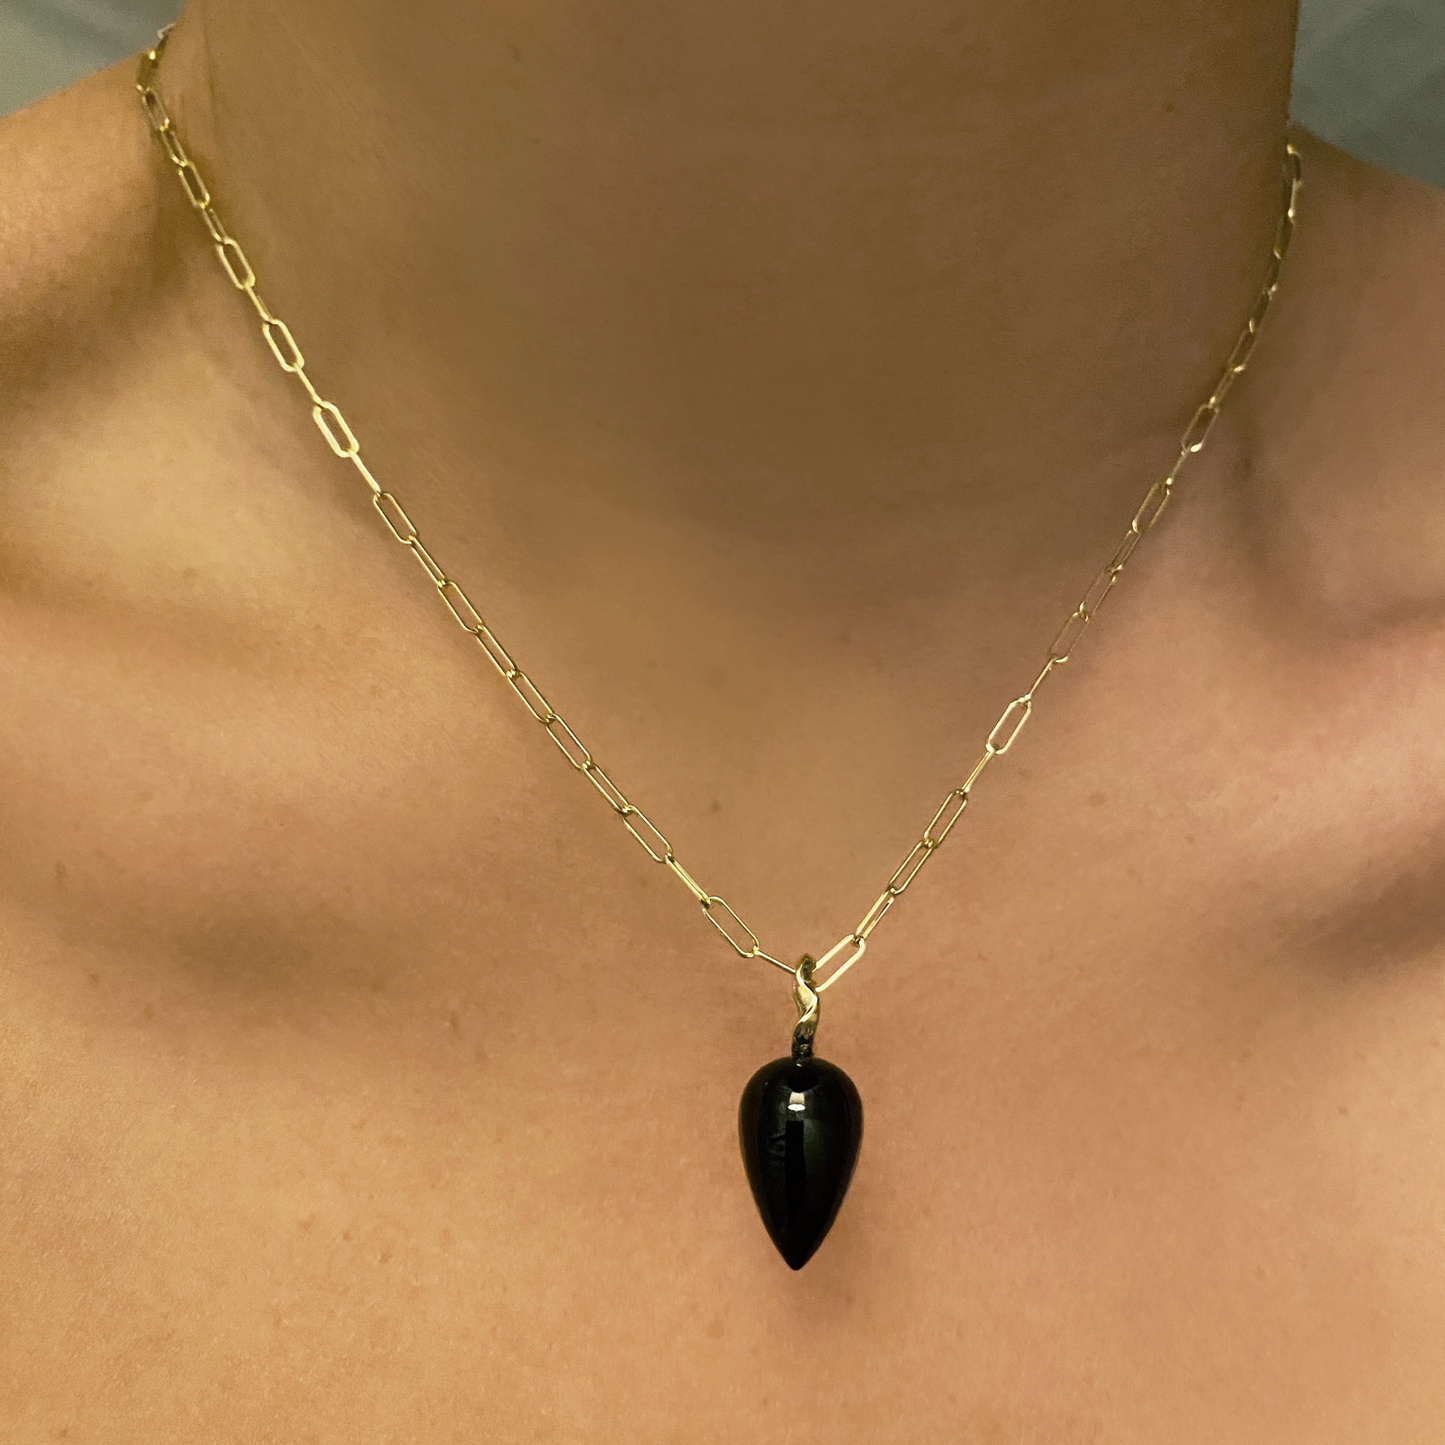 Black agate acorn drop charm. Styled on a neck hanging from a paperclip chain necklace